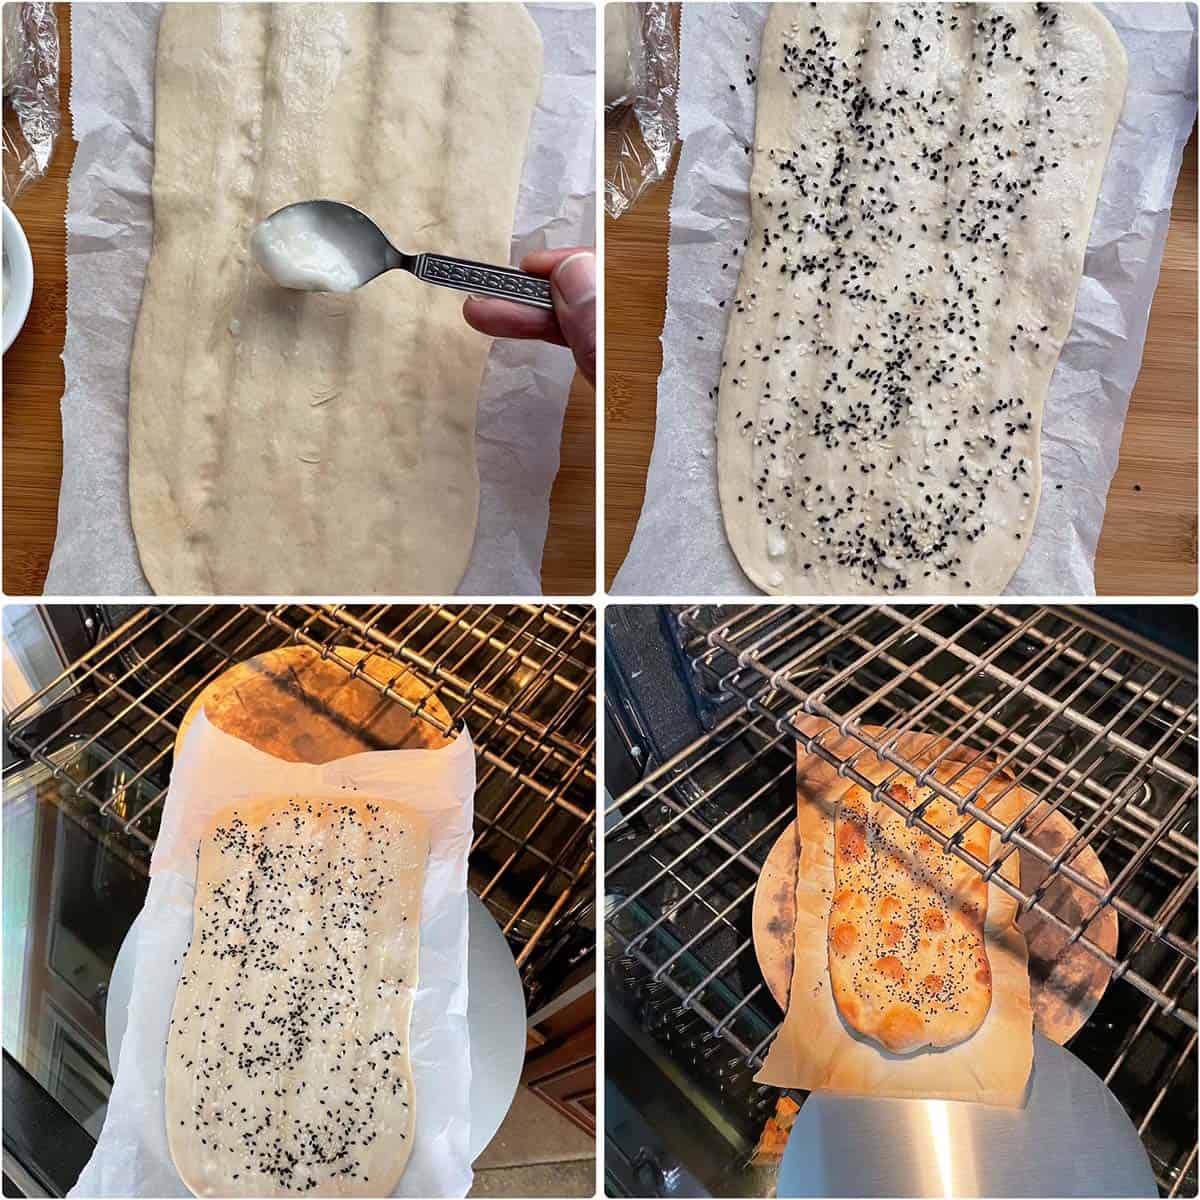 4 panel photo showing the brushing of dough with roomal and baking in the oven.